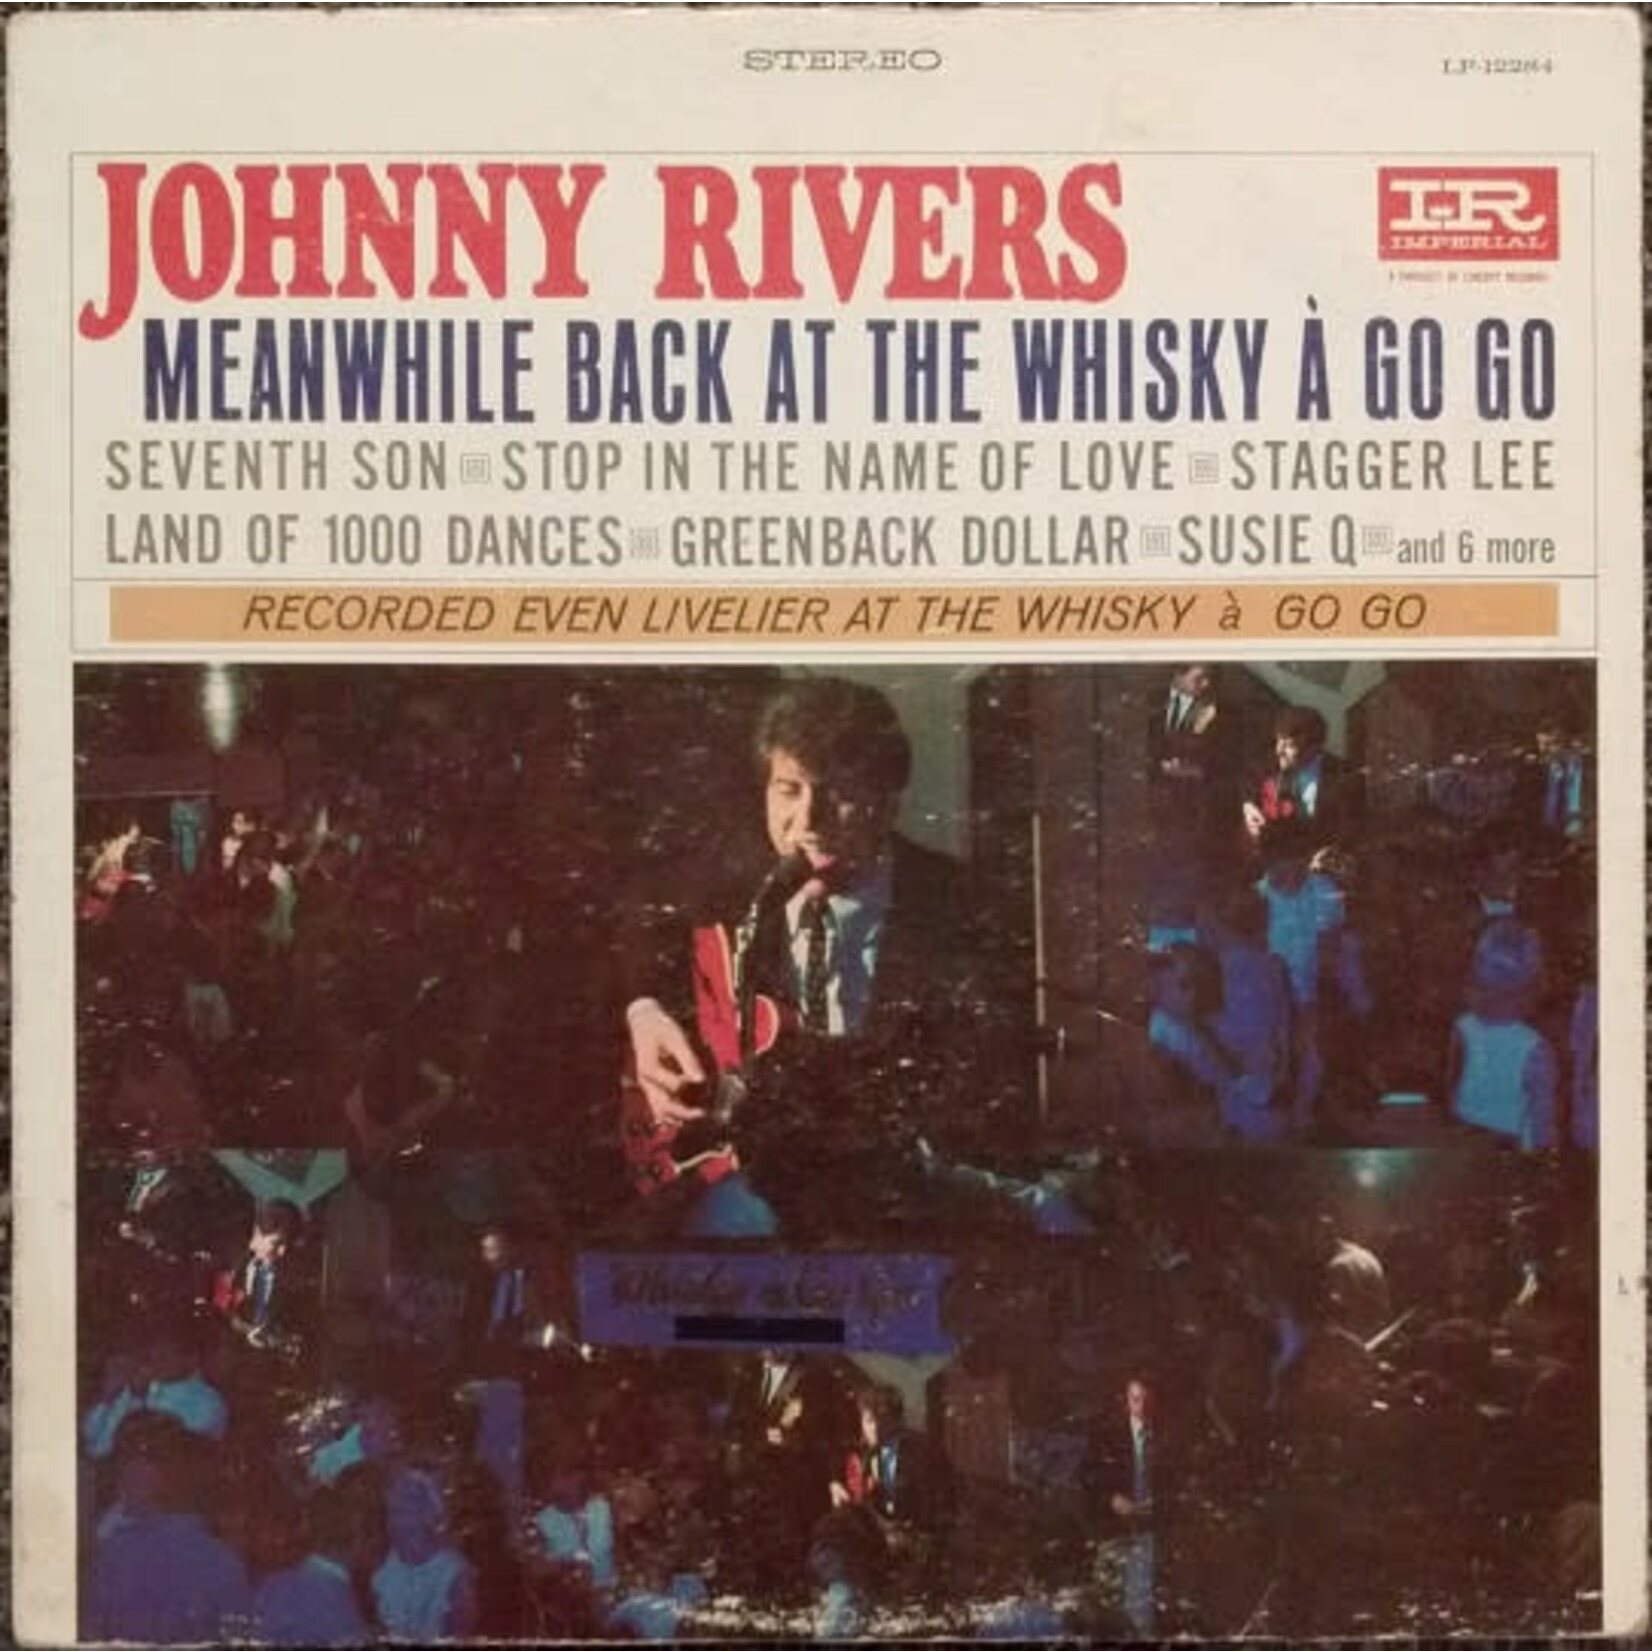 [Vintage] Johnny Rivers - Meanwhile Back At The Whisky A Go Go